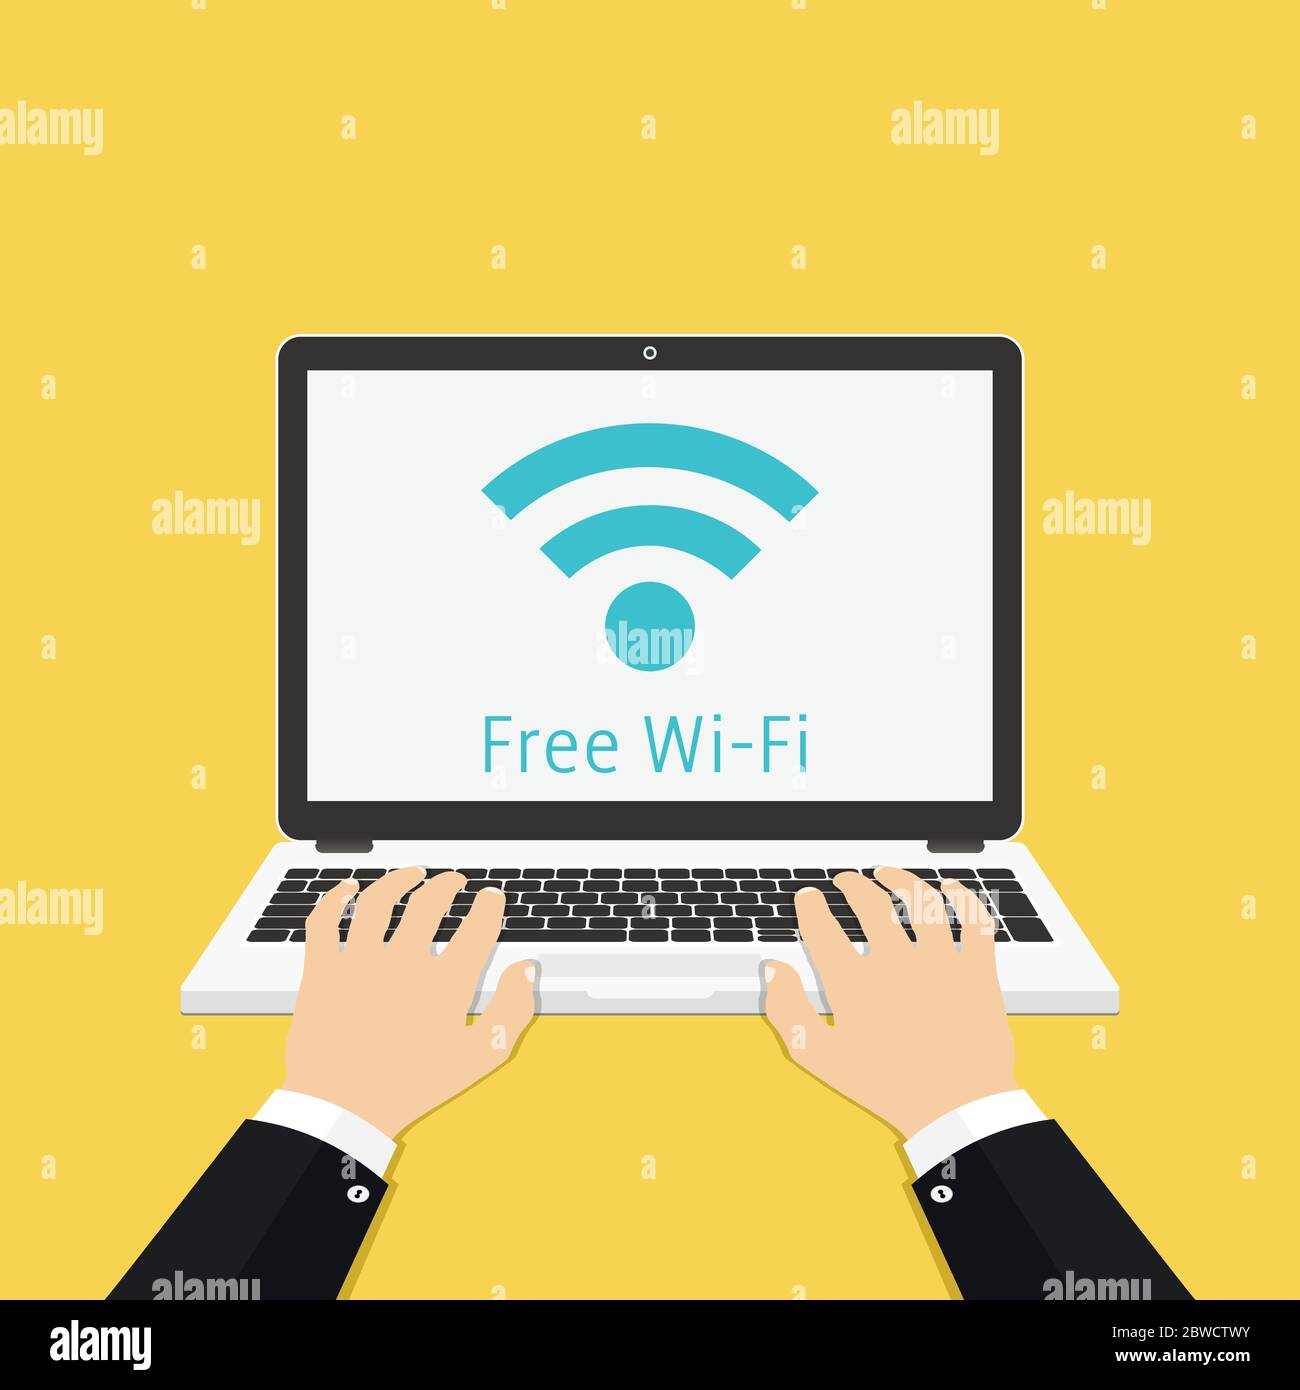 Laptop with free wi-fi sign on screen. Hands on the laptop. Vector Illustration. Stock Vector